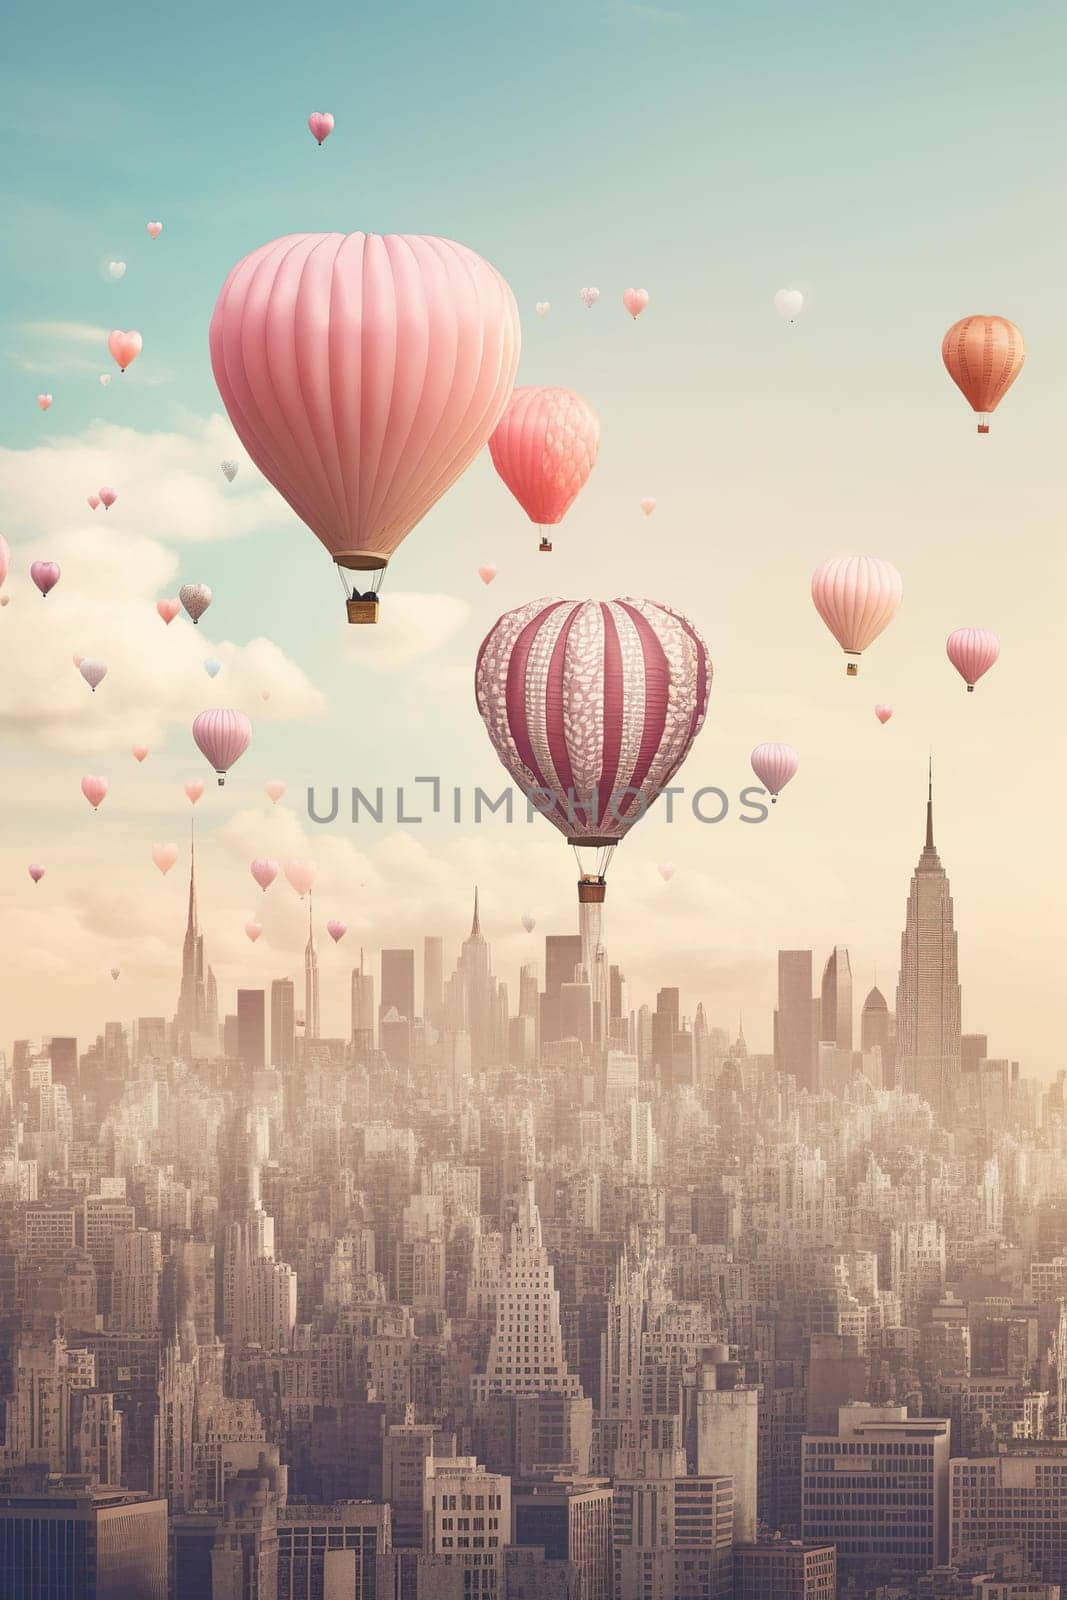 Cartoon Of Big Hot Air Balloons In The Sky Above Modern City With High Skyscapers by tan4ikk1